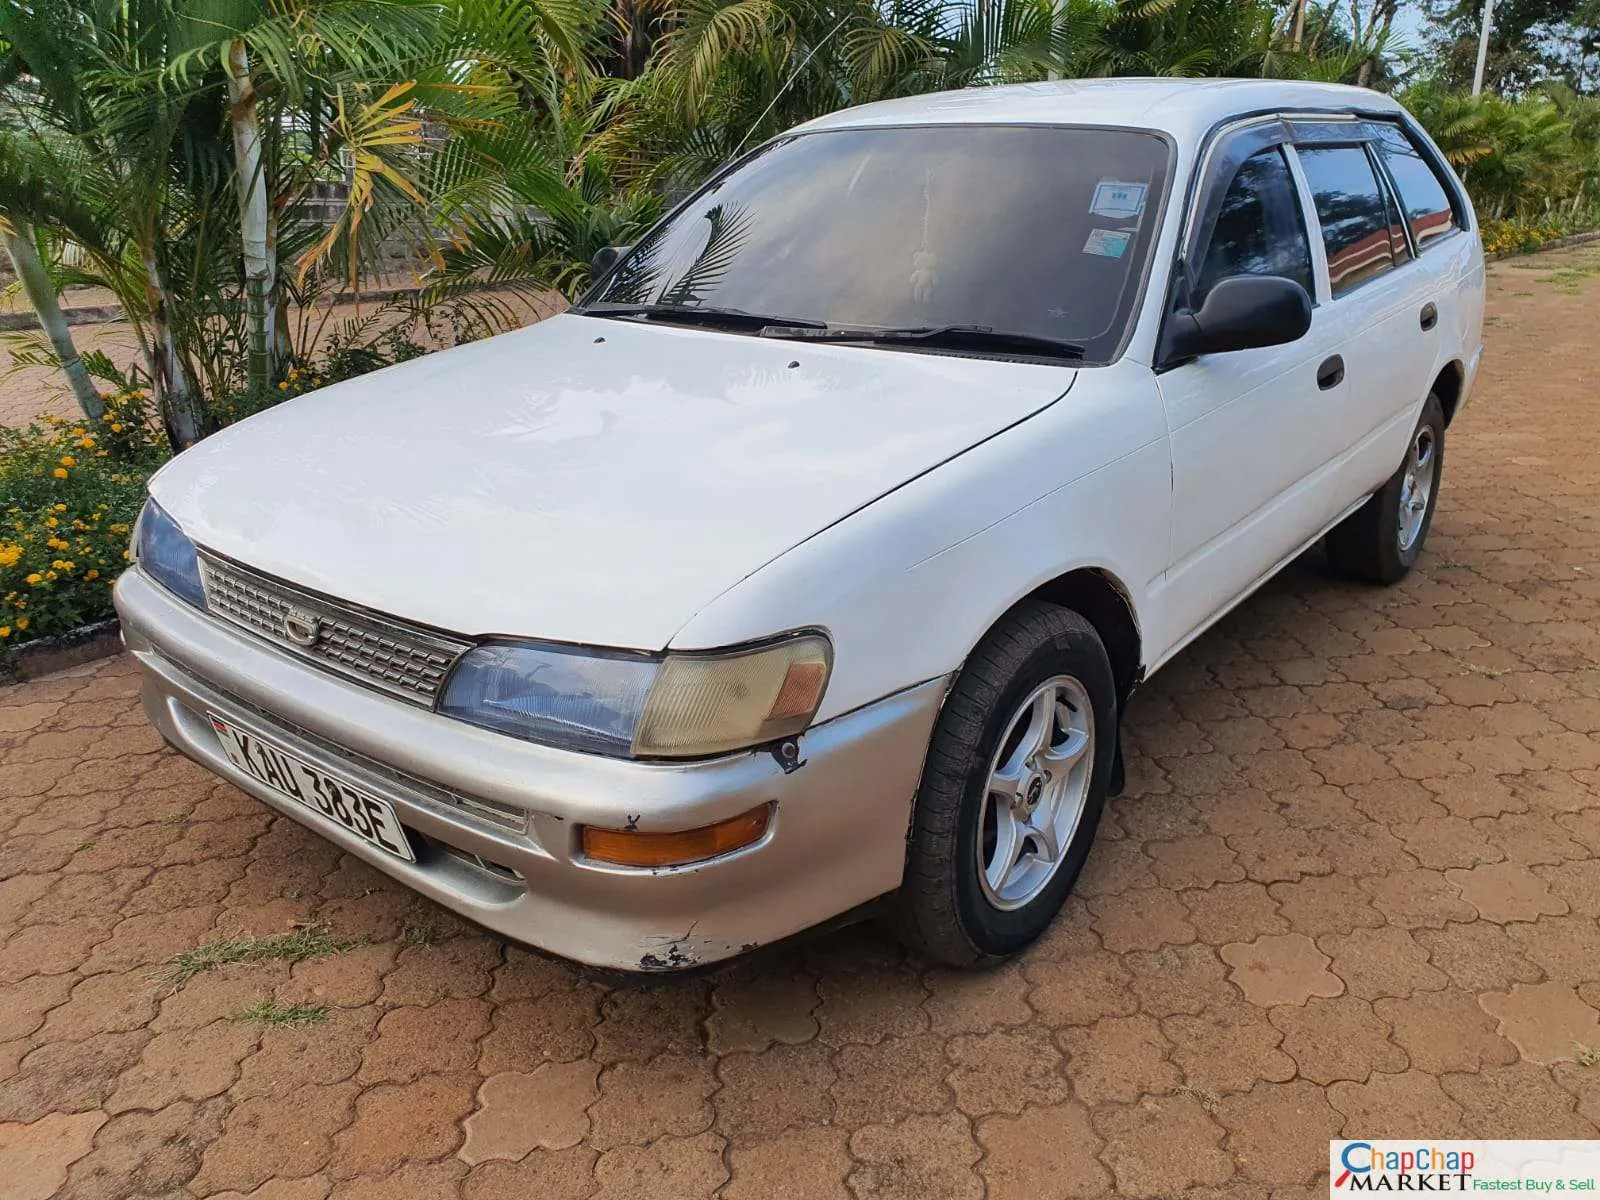 Toyota Corolla DX 102 for Sale in kenya You Pay 40% Deposit Trade in OK Corolla for sale in kenya hire purchase installments EXCLUSIVE Corolla kenya